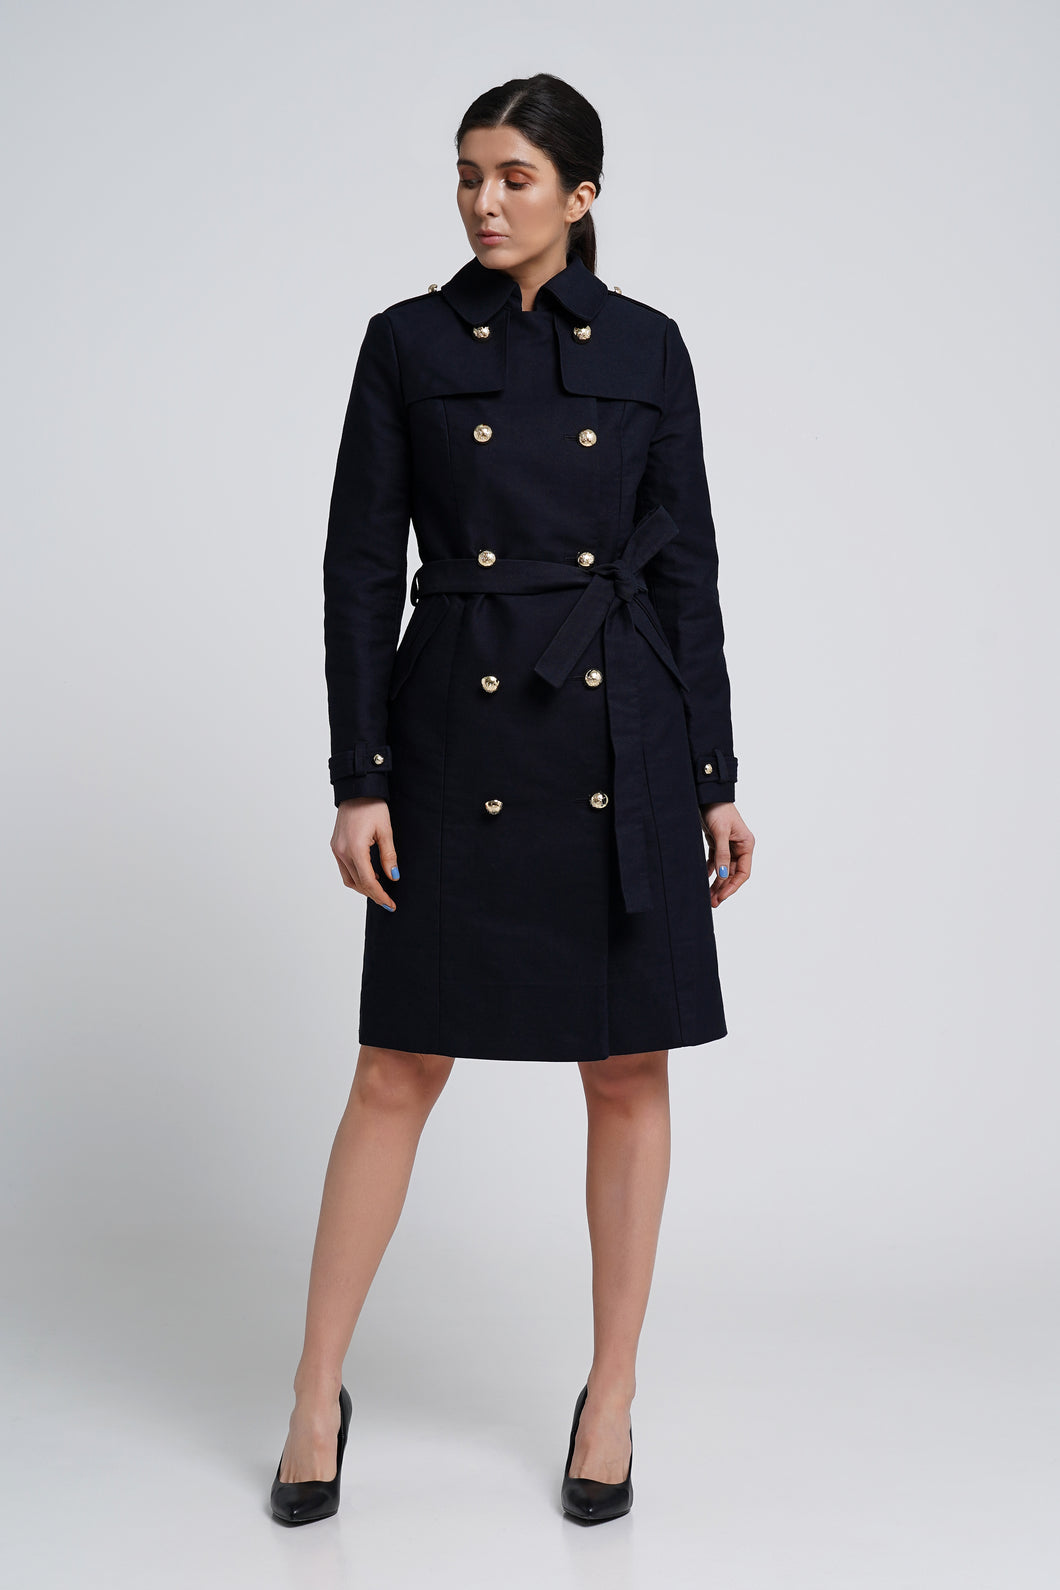 Black double breasted trench coat